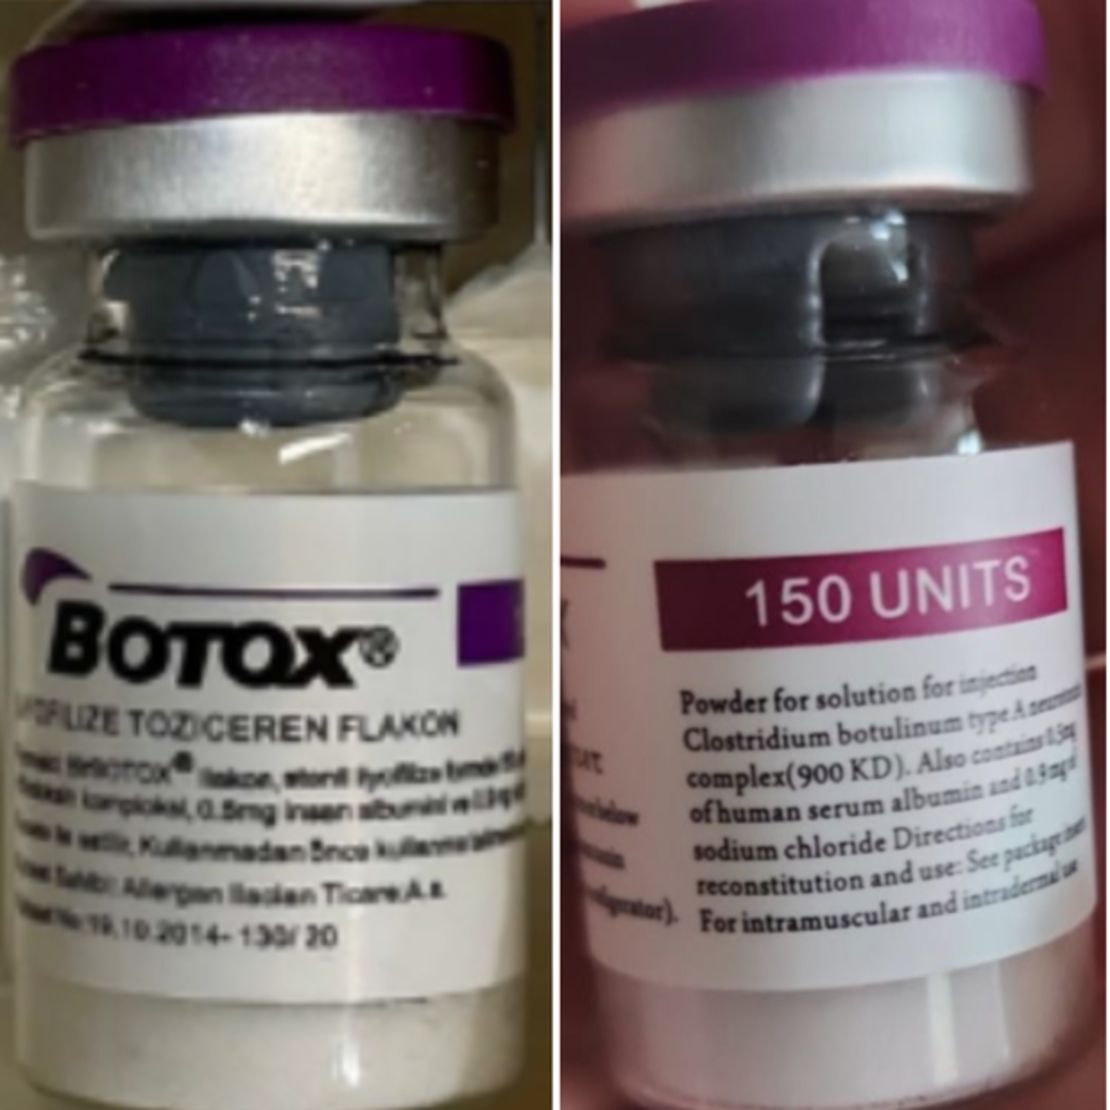 Counterfeit Botox cartons and bottles may indicate 150-unit doses, which are not units made by the companies AbbVie or Allergan, the FDA said.